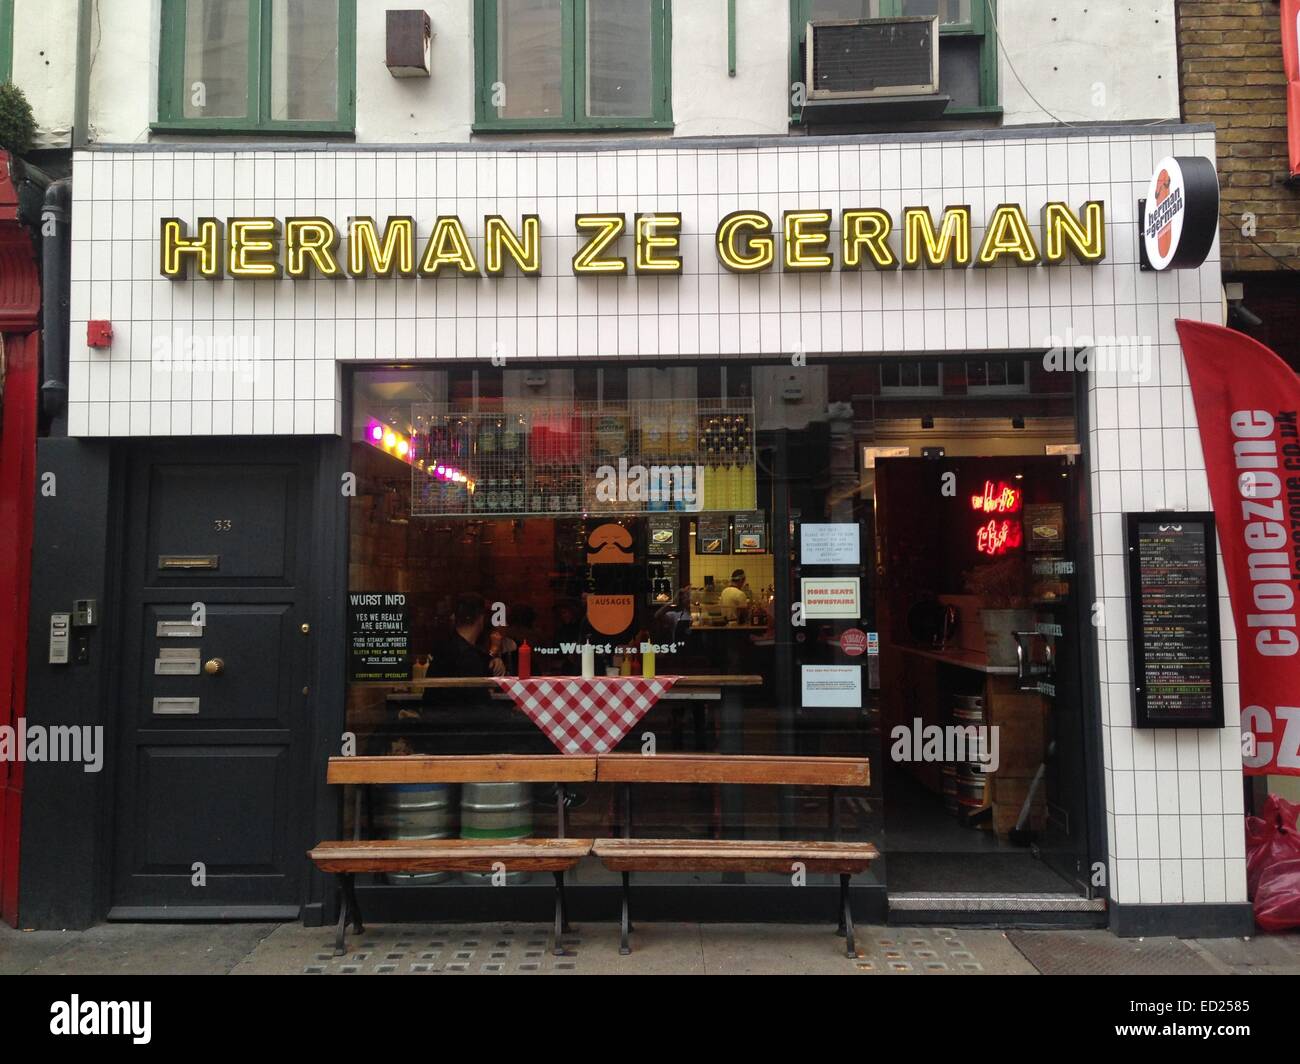 Soho, London, UK. 01st Oct, 2014. The restaurant 'Herman ze German' is open in Soho, London, United Kingdom, 01 October 2014. Arts, culture, and luxury goods 'Made in Germany' are en vogue in London. Shortly before Christmas, Londoners are particularly fond of German food. Photo: Marc Schaefer/dpa/Alamy Live News Stock Photo